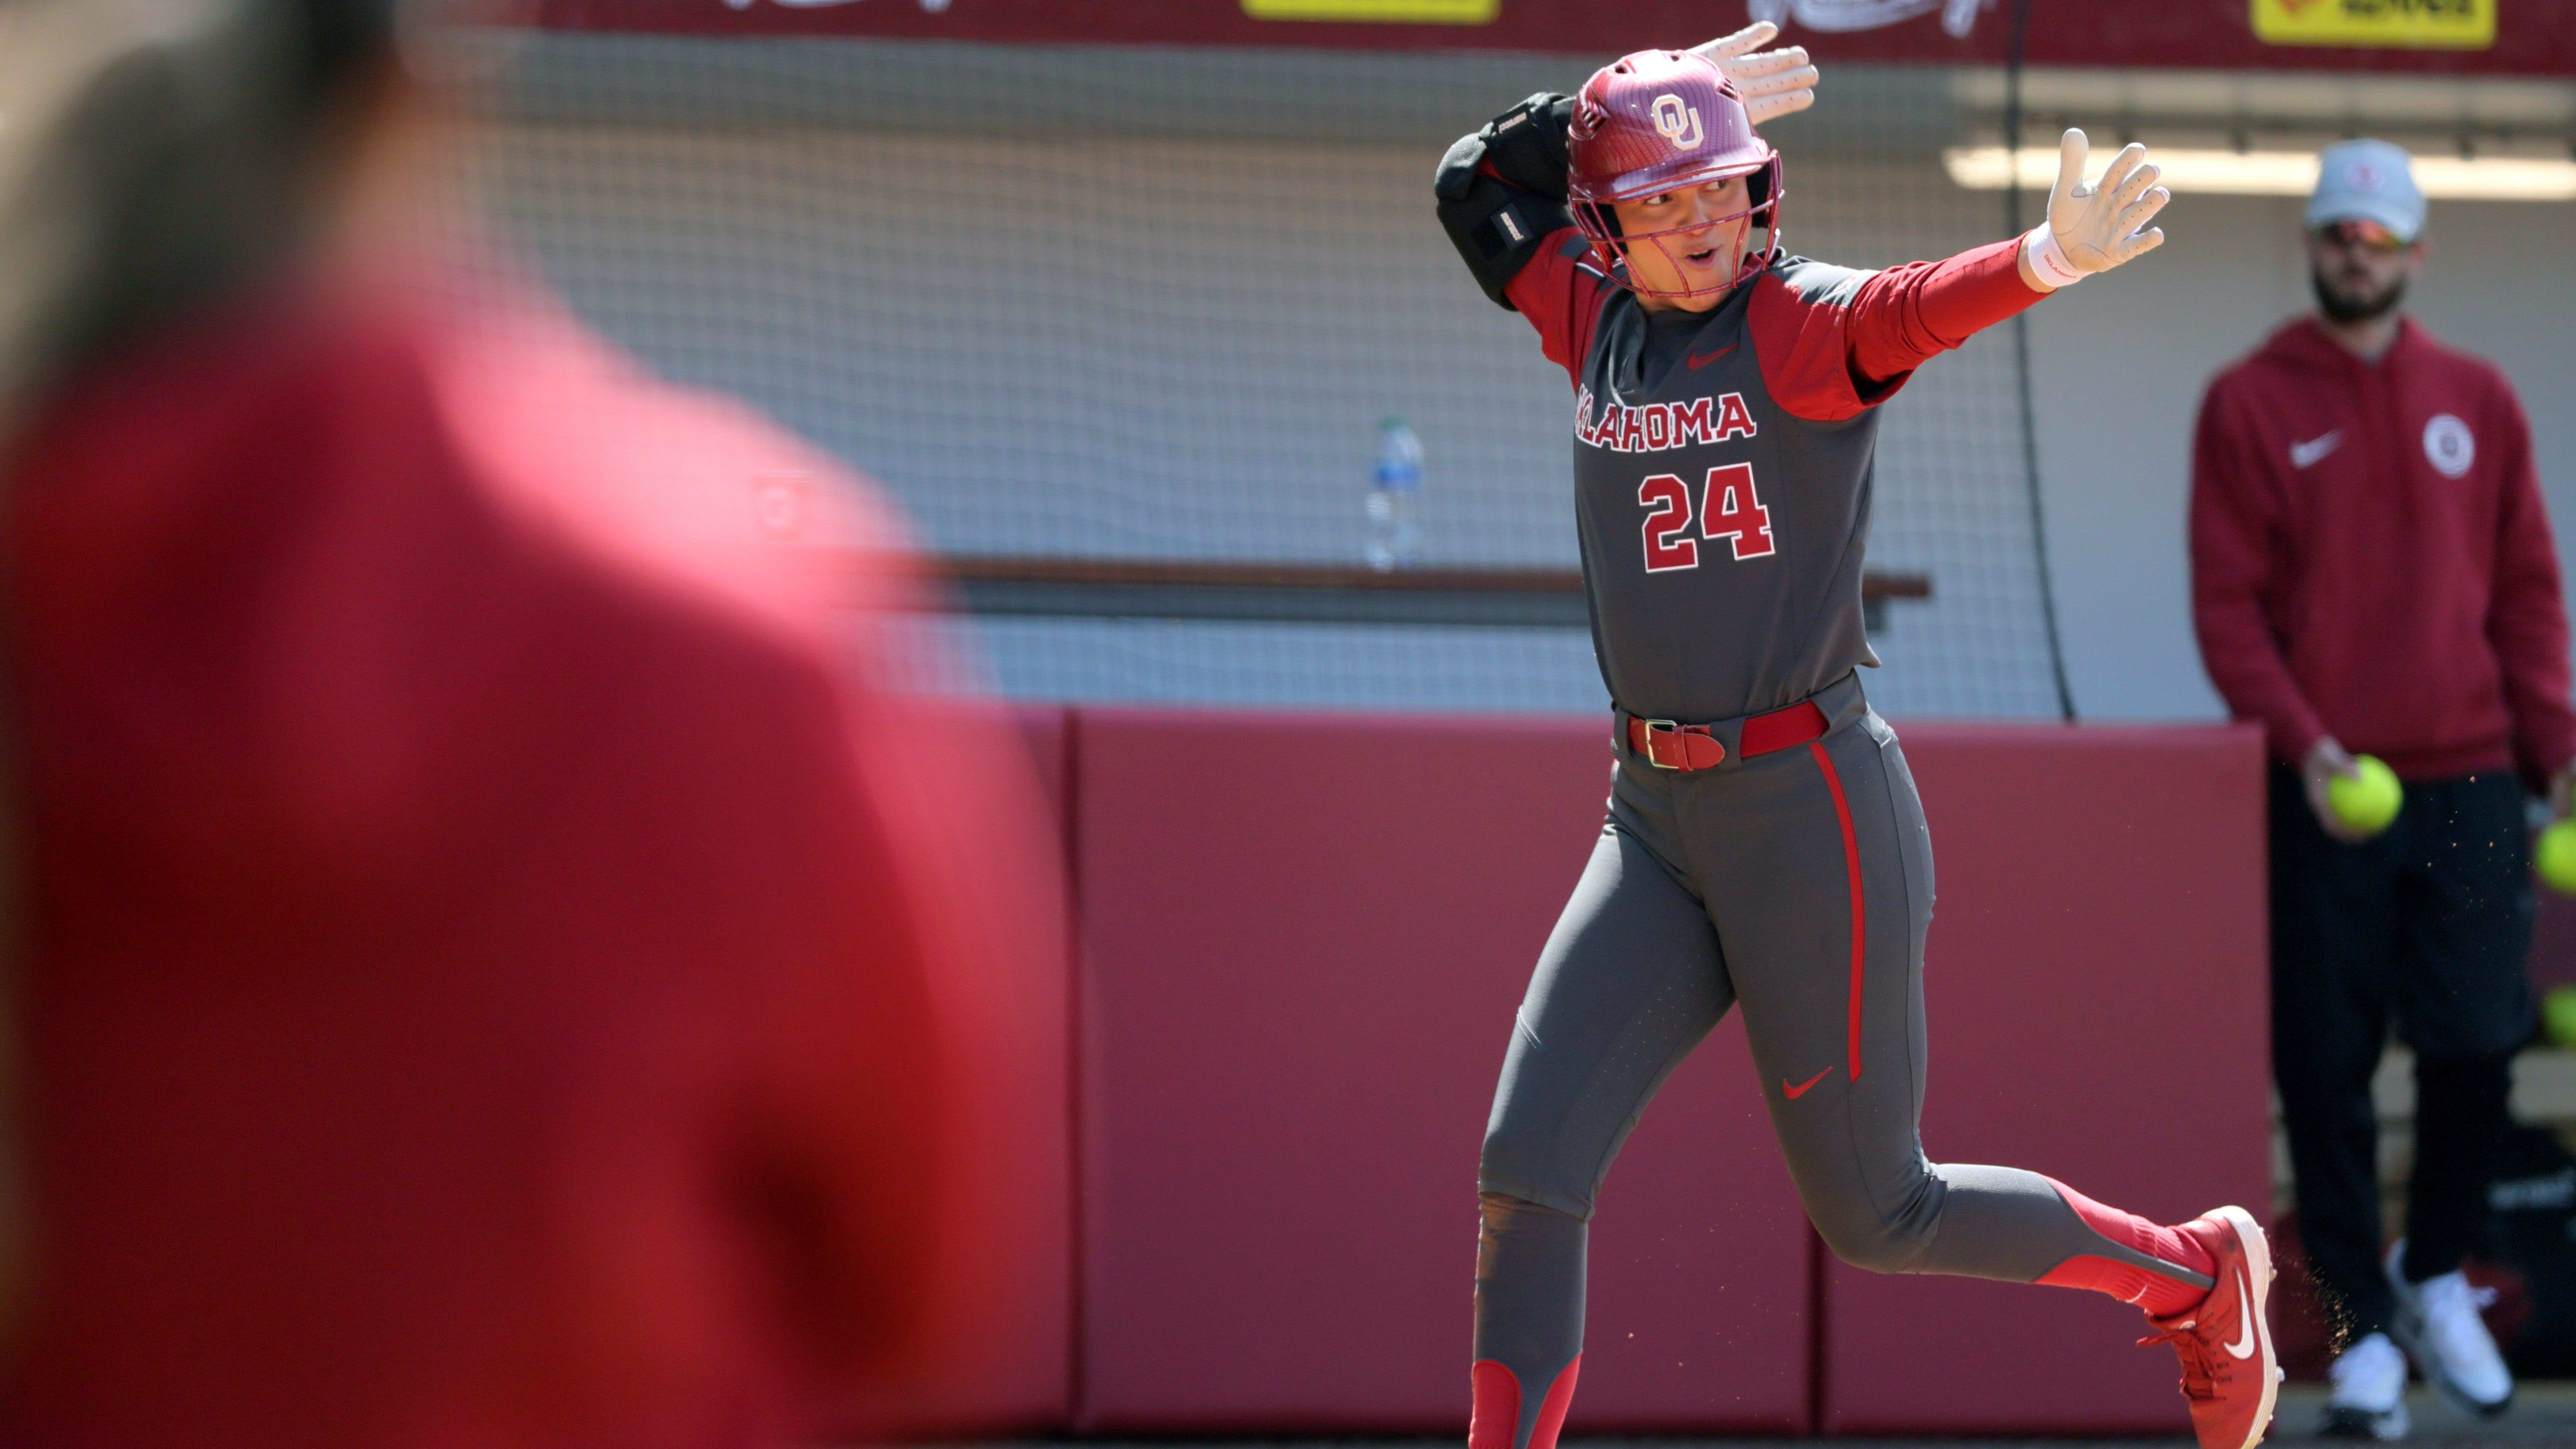 OU Softball: Maxwell Shuts Down BYU in 8-0 Win, Coleman’s Homer Secures Victory